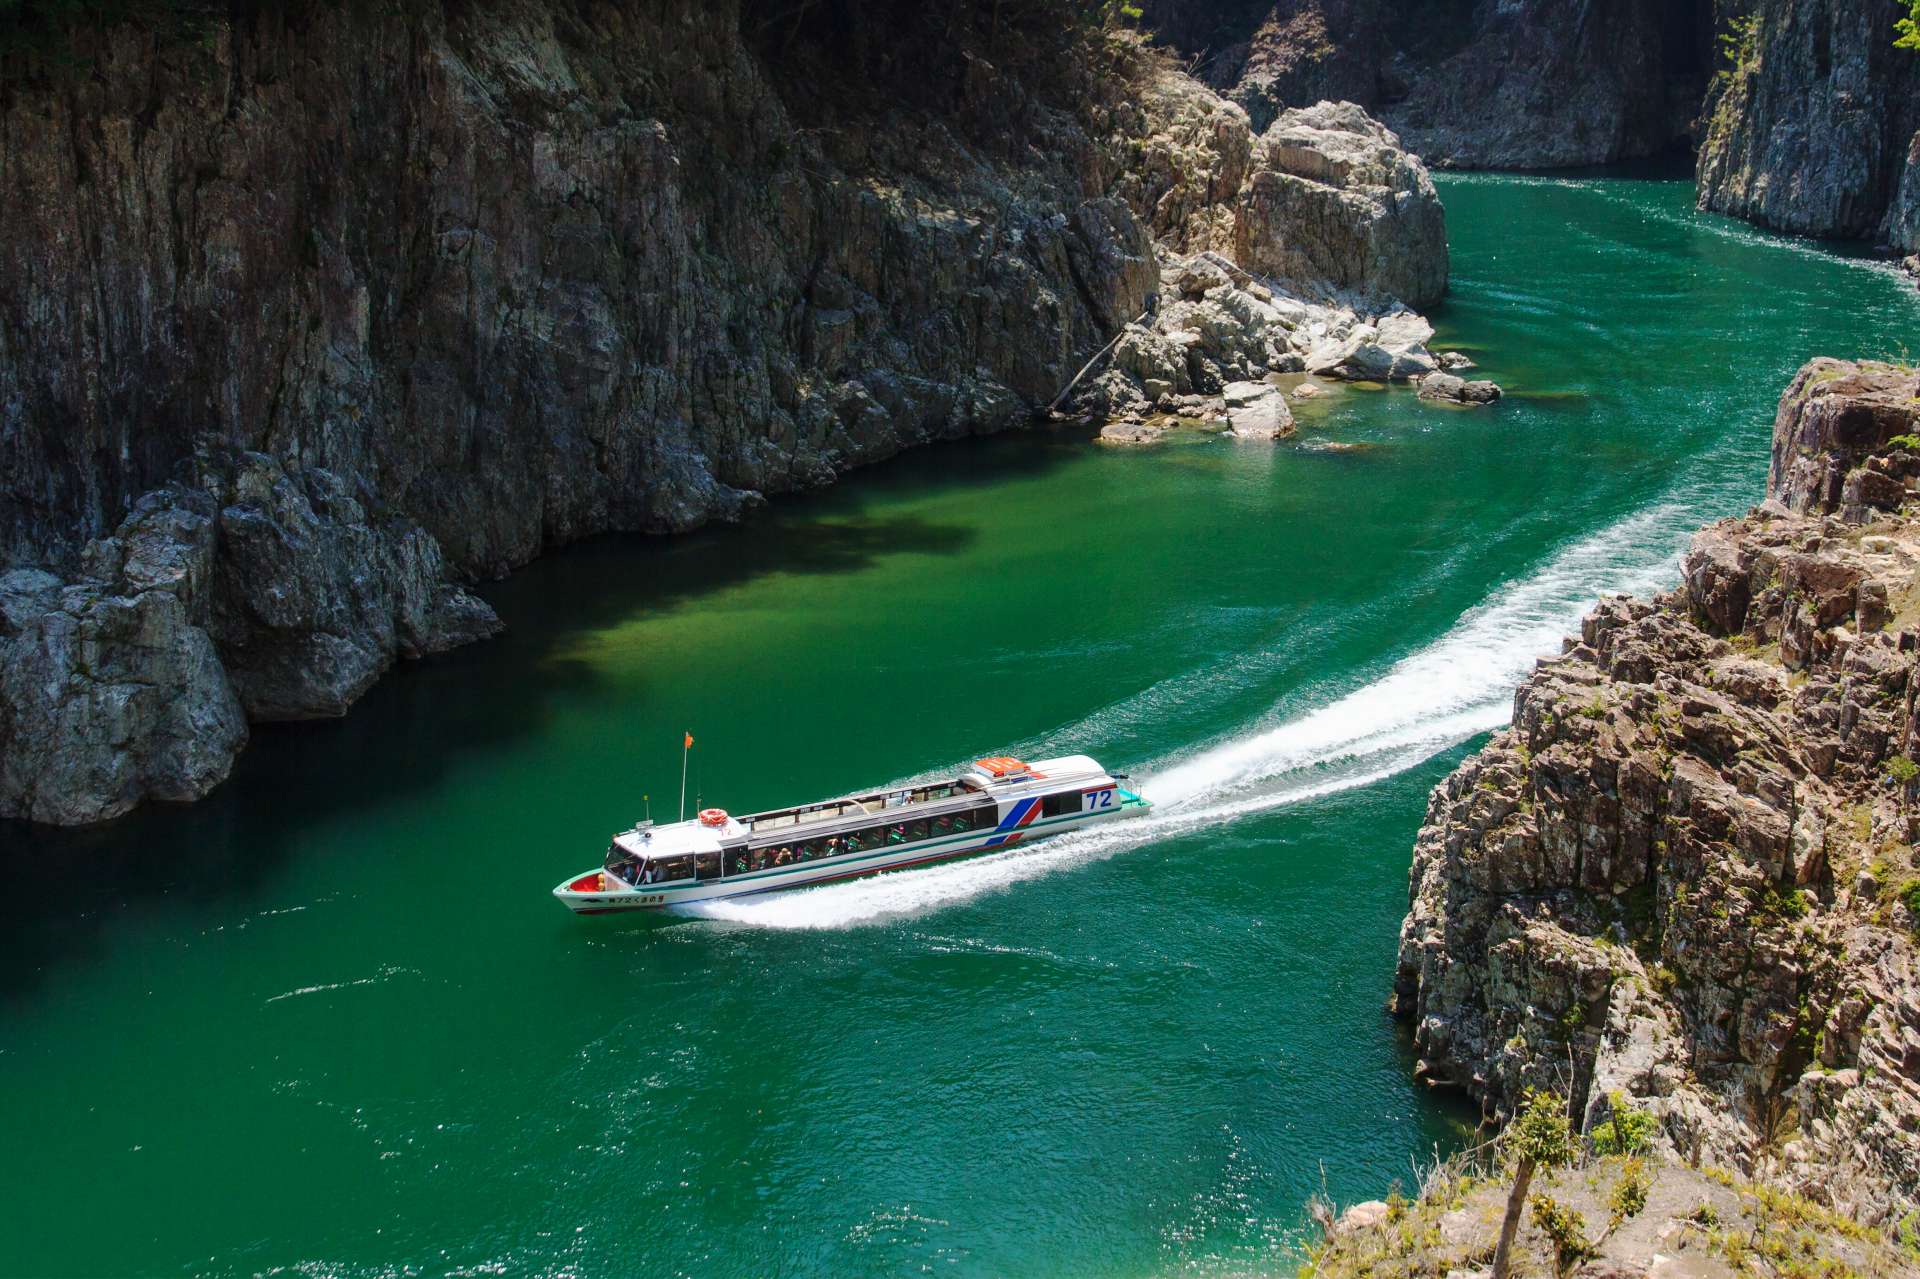 Travel by boat down Doro-kyo Gorge, a national Special Place of Scenic Beauty.